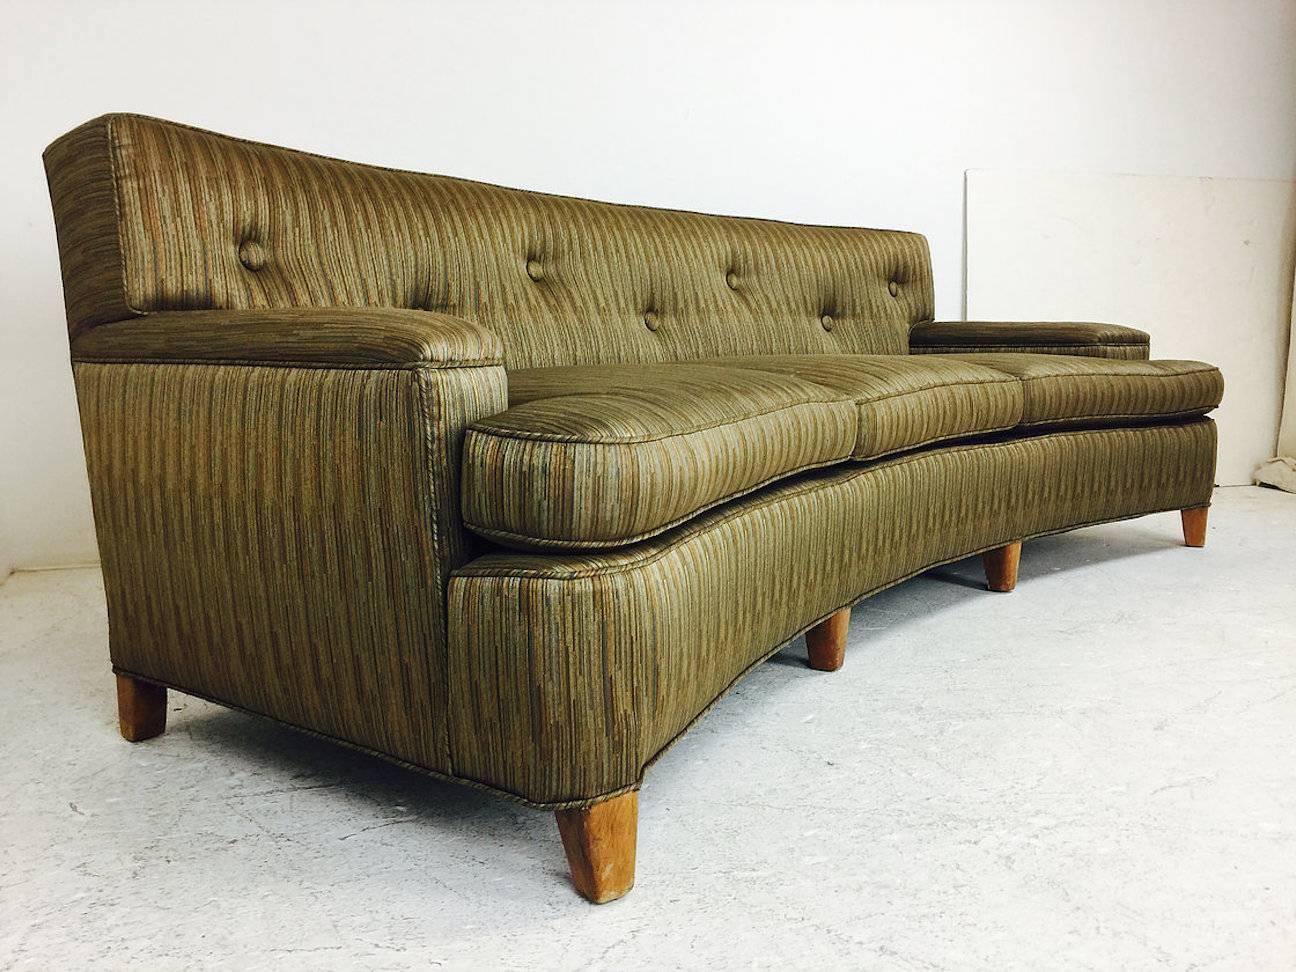 Mid-Century Modern Dunbar style sofa with a slight curved front. Upholstery is in good as found condition, circa 1960s.

Dimensions:
91" W X 36" D X 32" T
seat height 18".